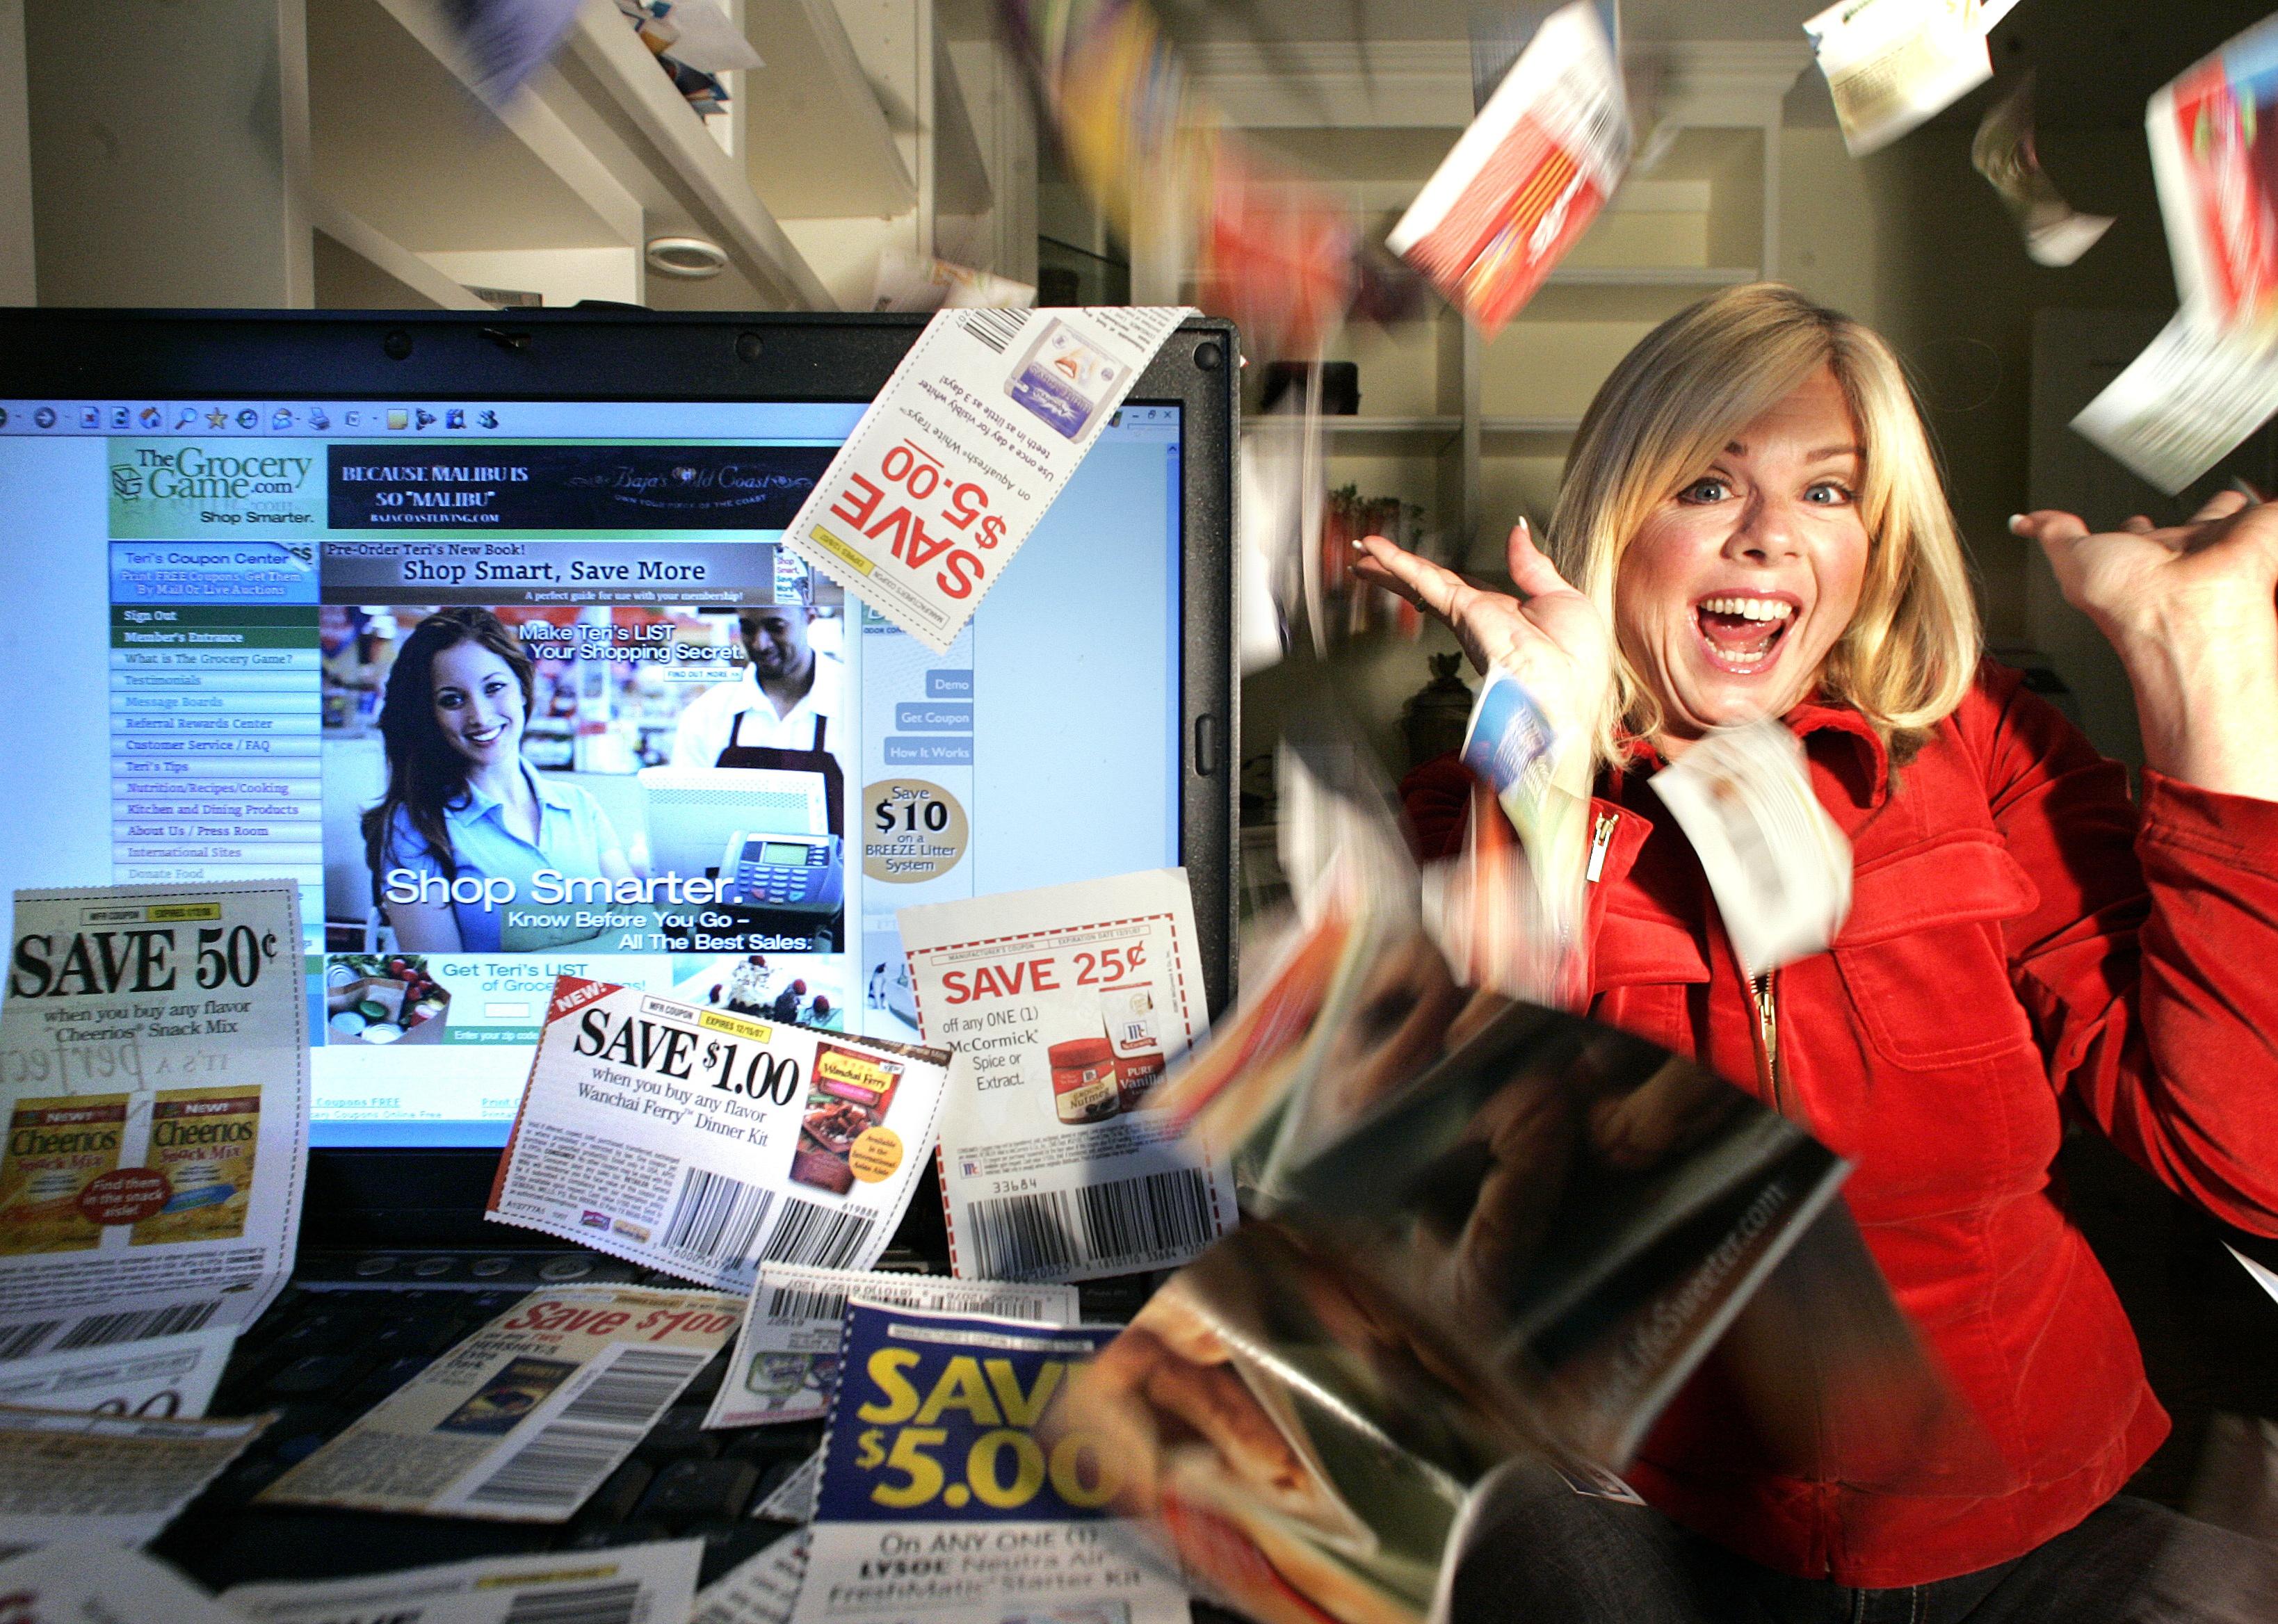 A woman throws coupons in the air next to a computer showing digital coupons.